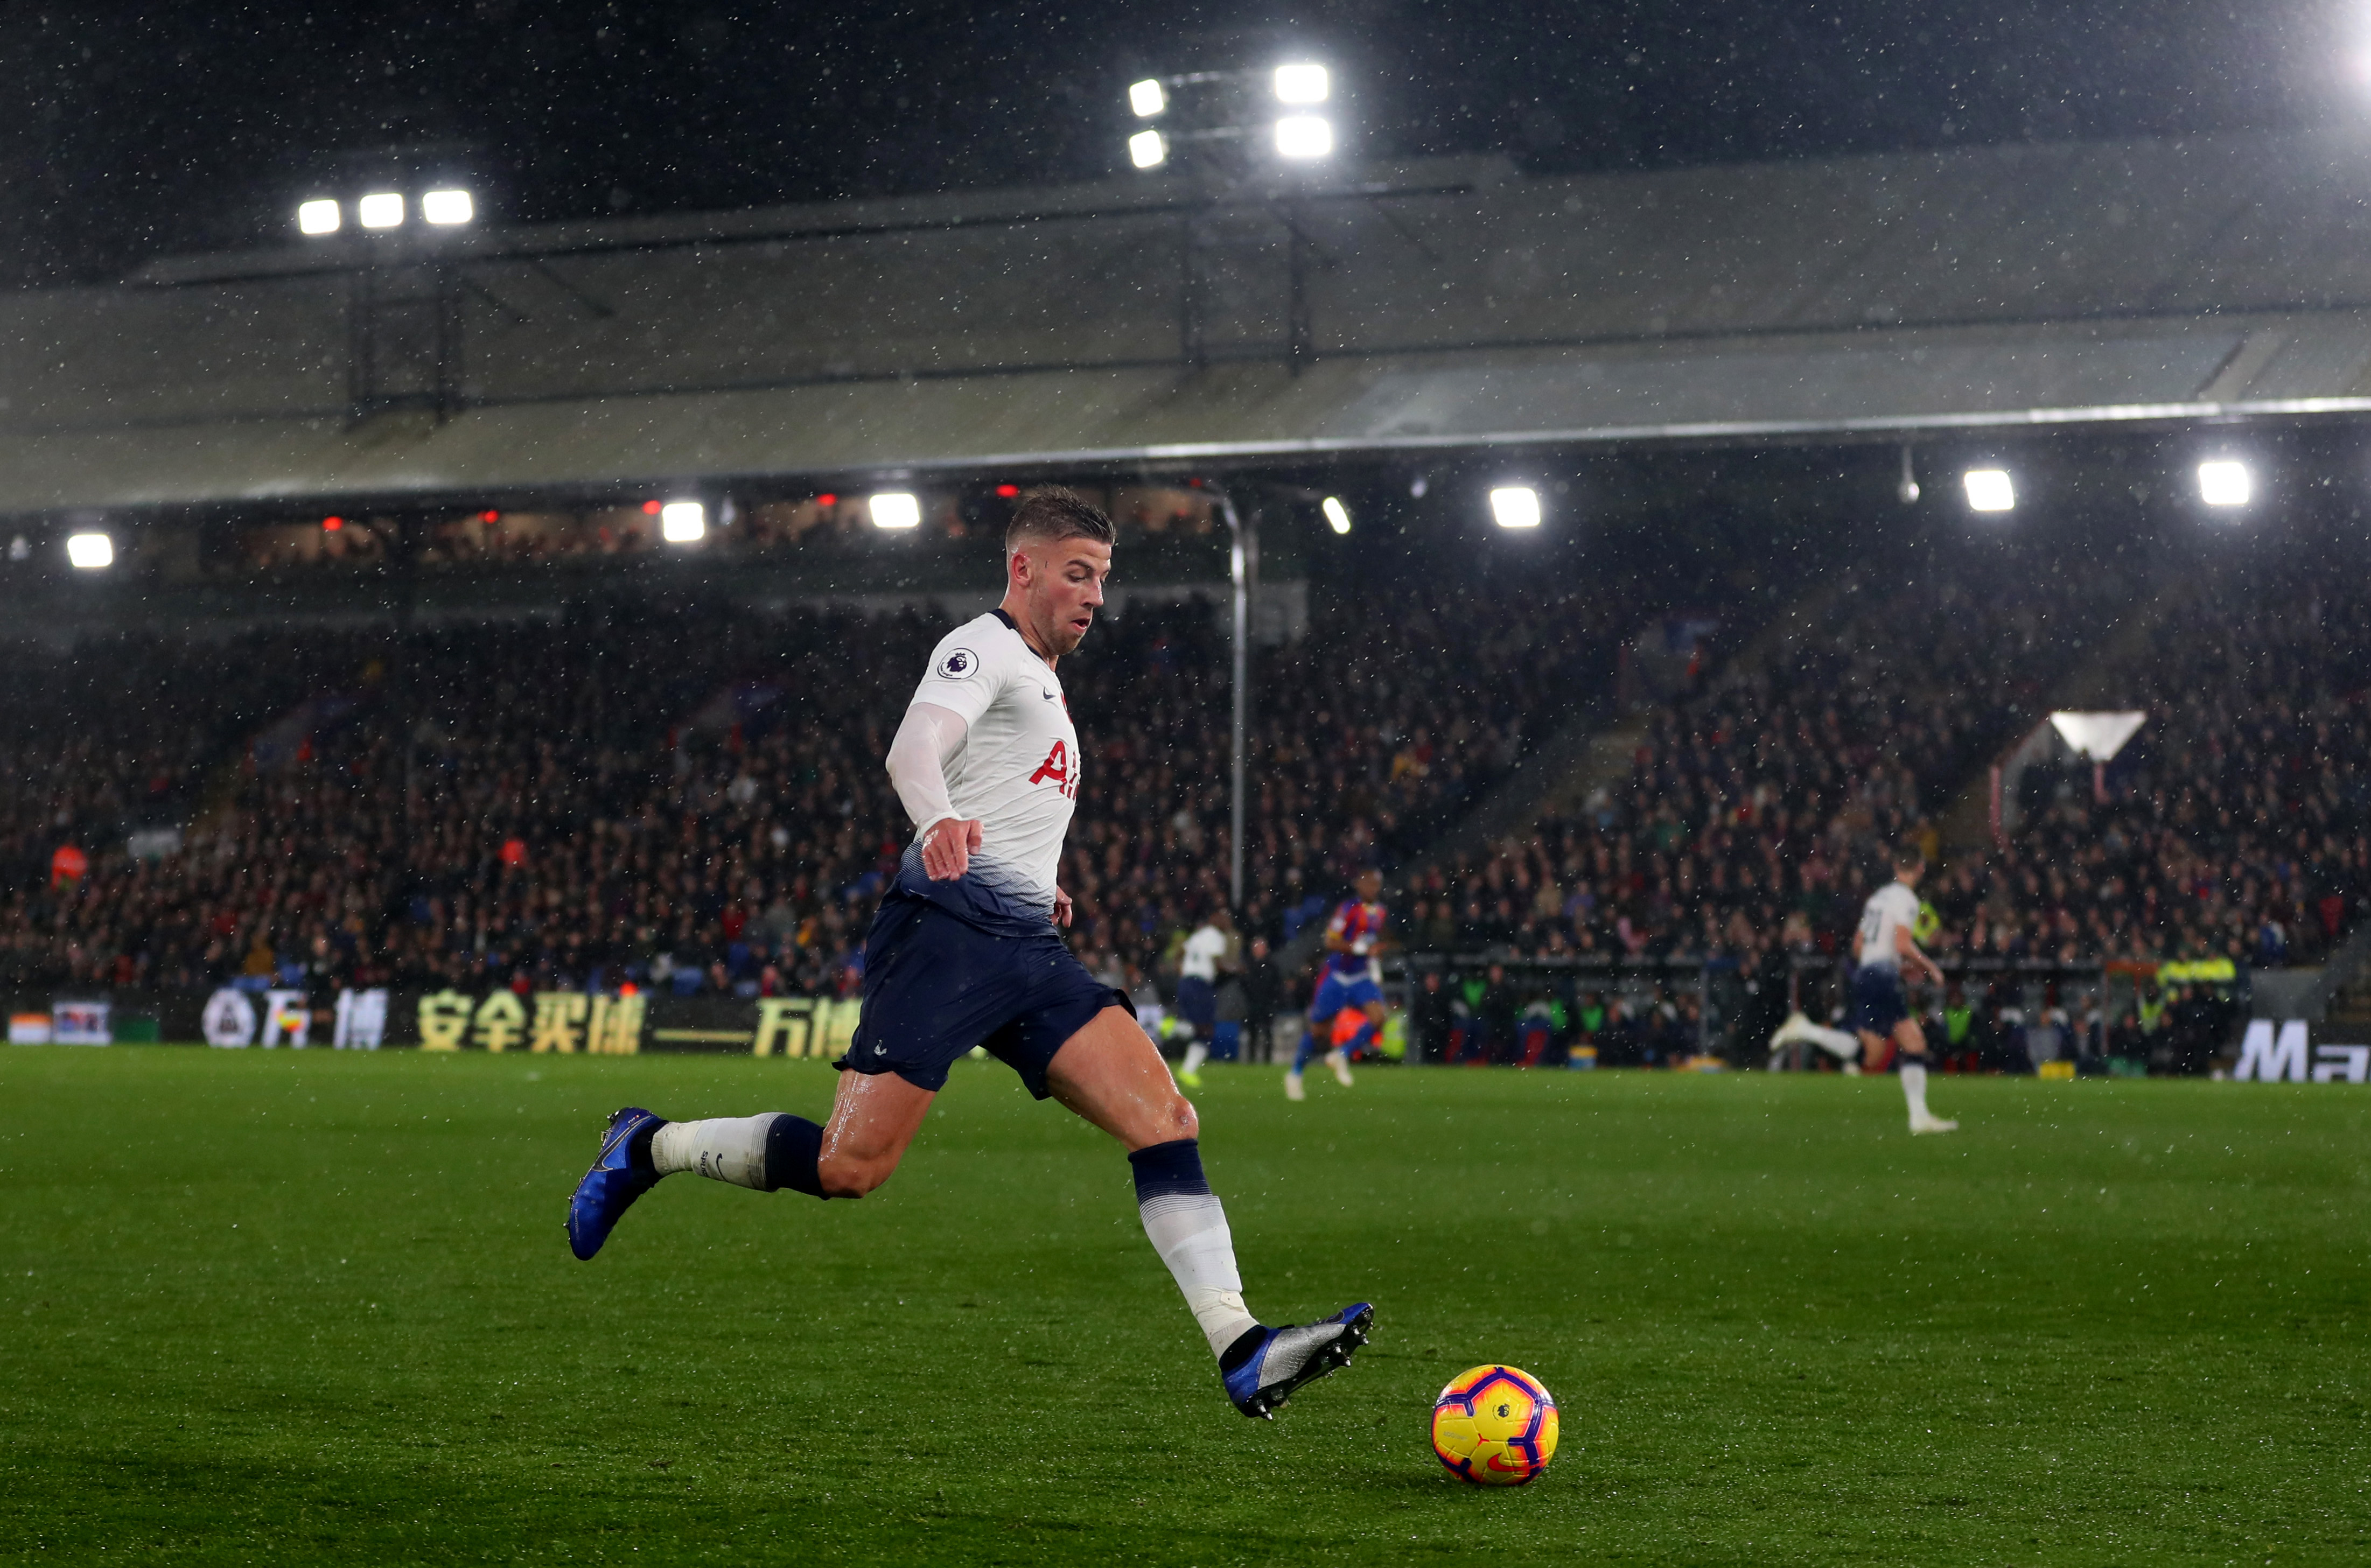 LONDON, ENGLAND - NOVEMBER 10: Toby Alderweireld of Tottenham Hotspur during the Premier League match between Crystal Palace and Tottenham Hotspur at Selhurst Park on November 10, 2018 in London, United Kingdom. (Photo by Catherine Ivill/Getty Images)